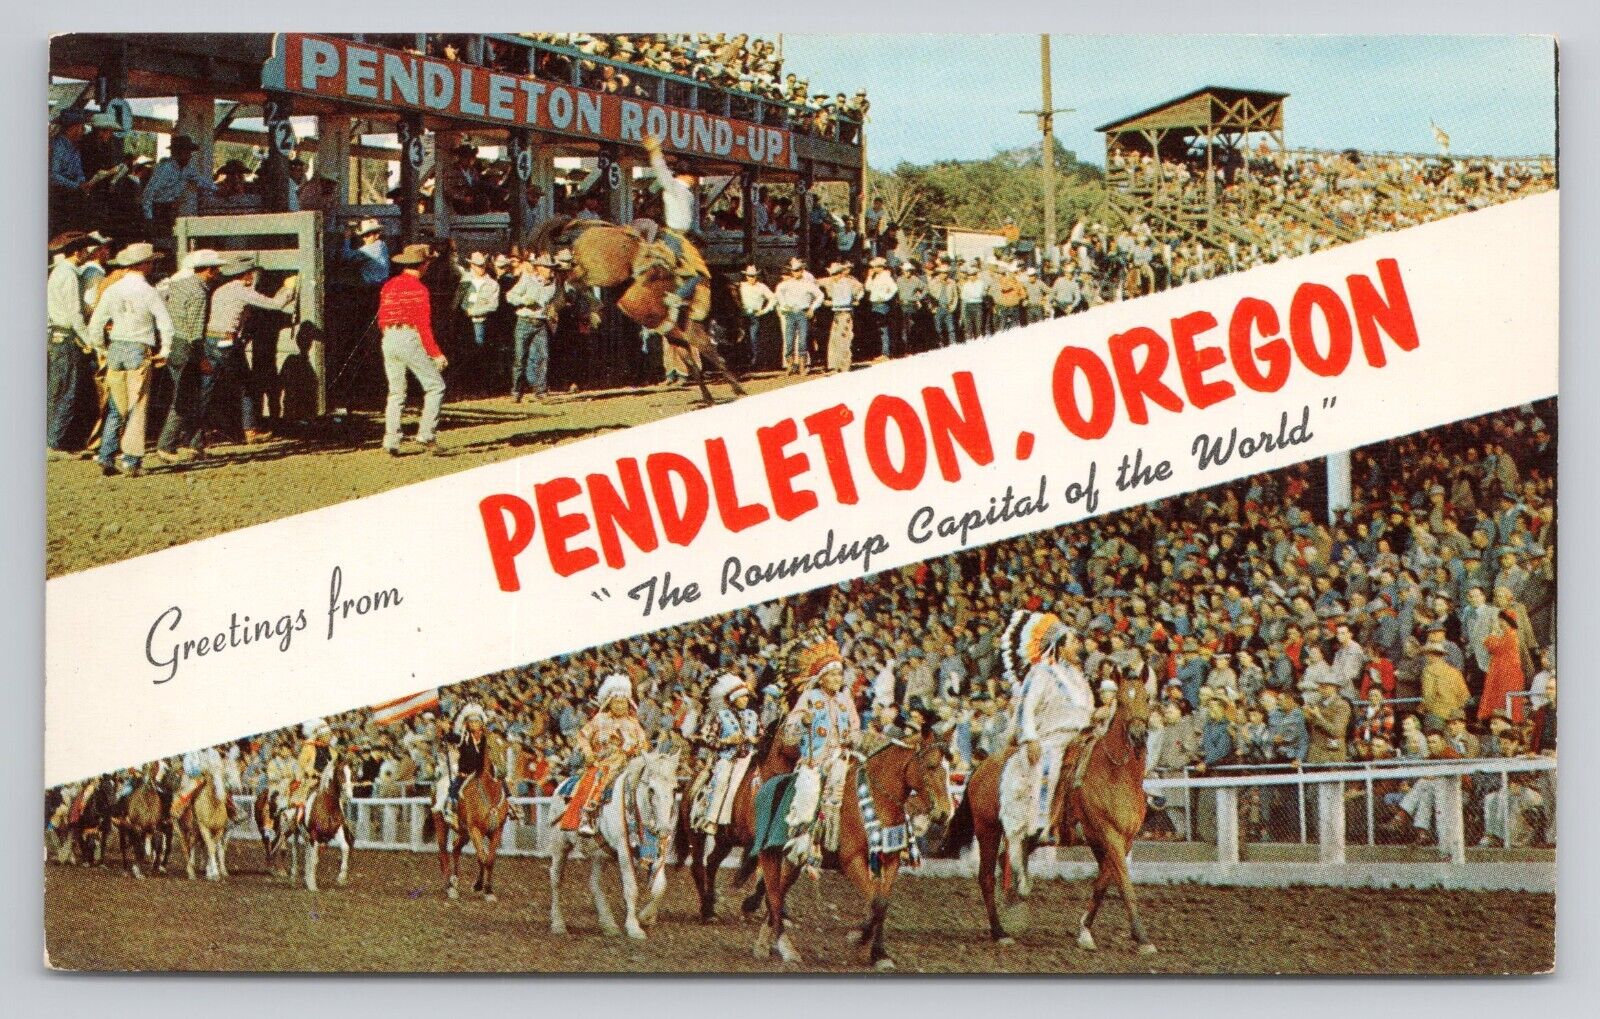 Postcard Greetings From Pendleton Oregon The Roundup Capital Of The World